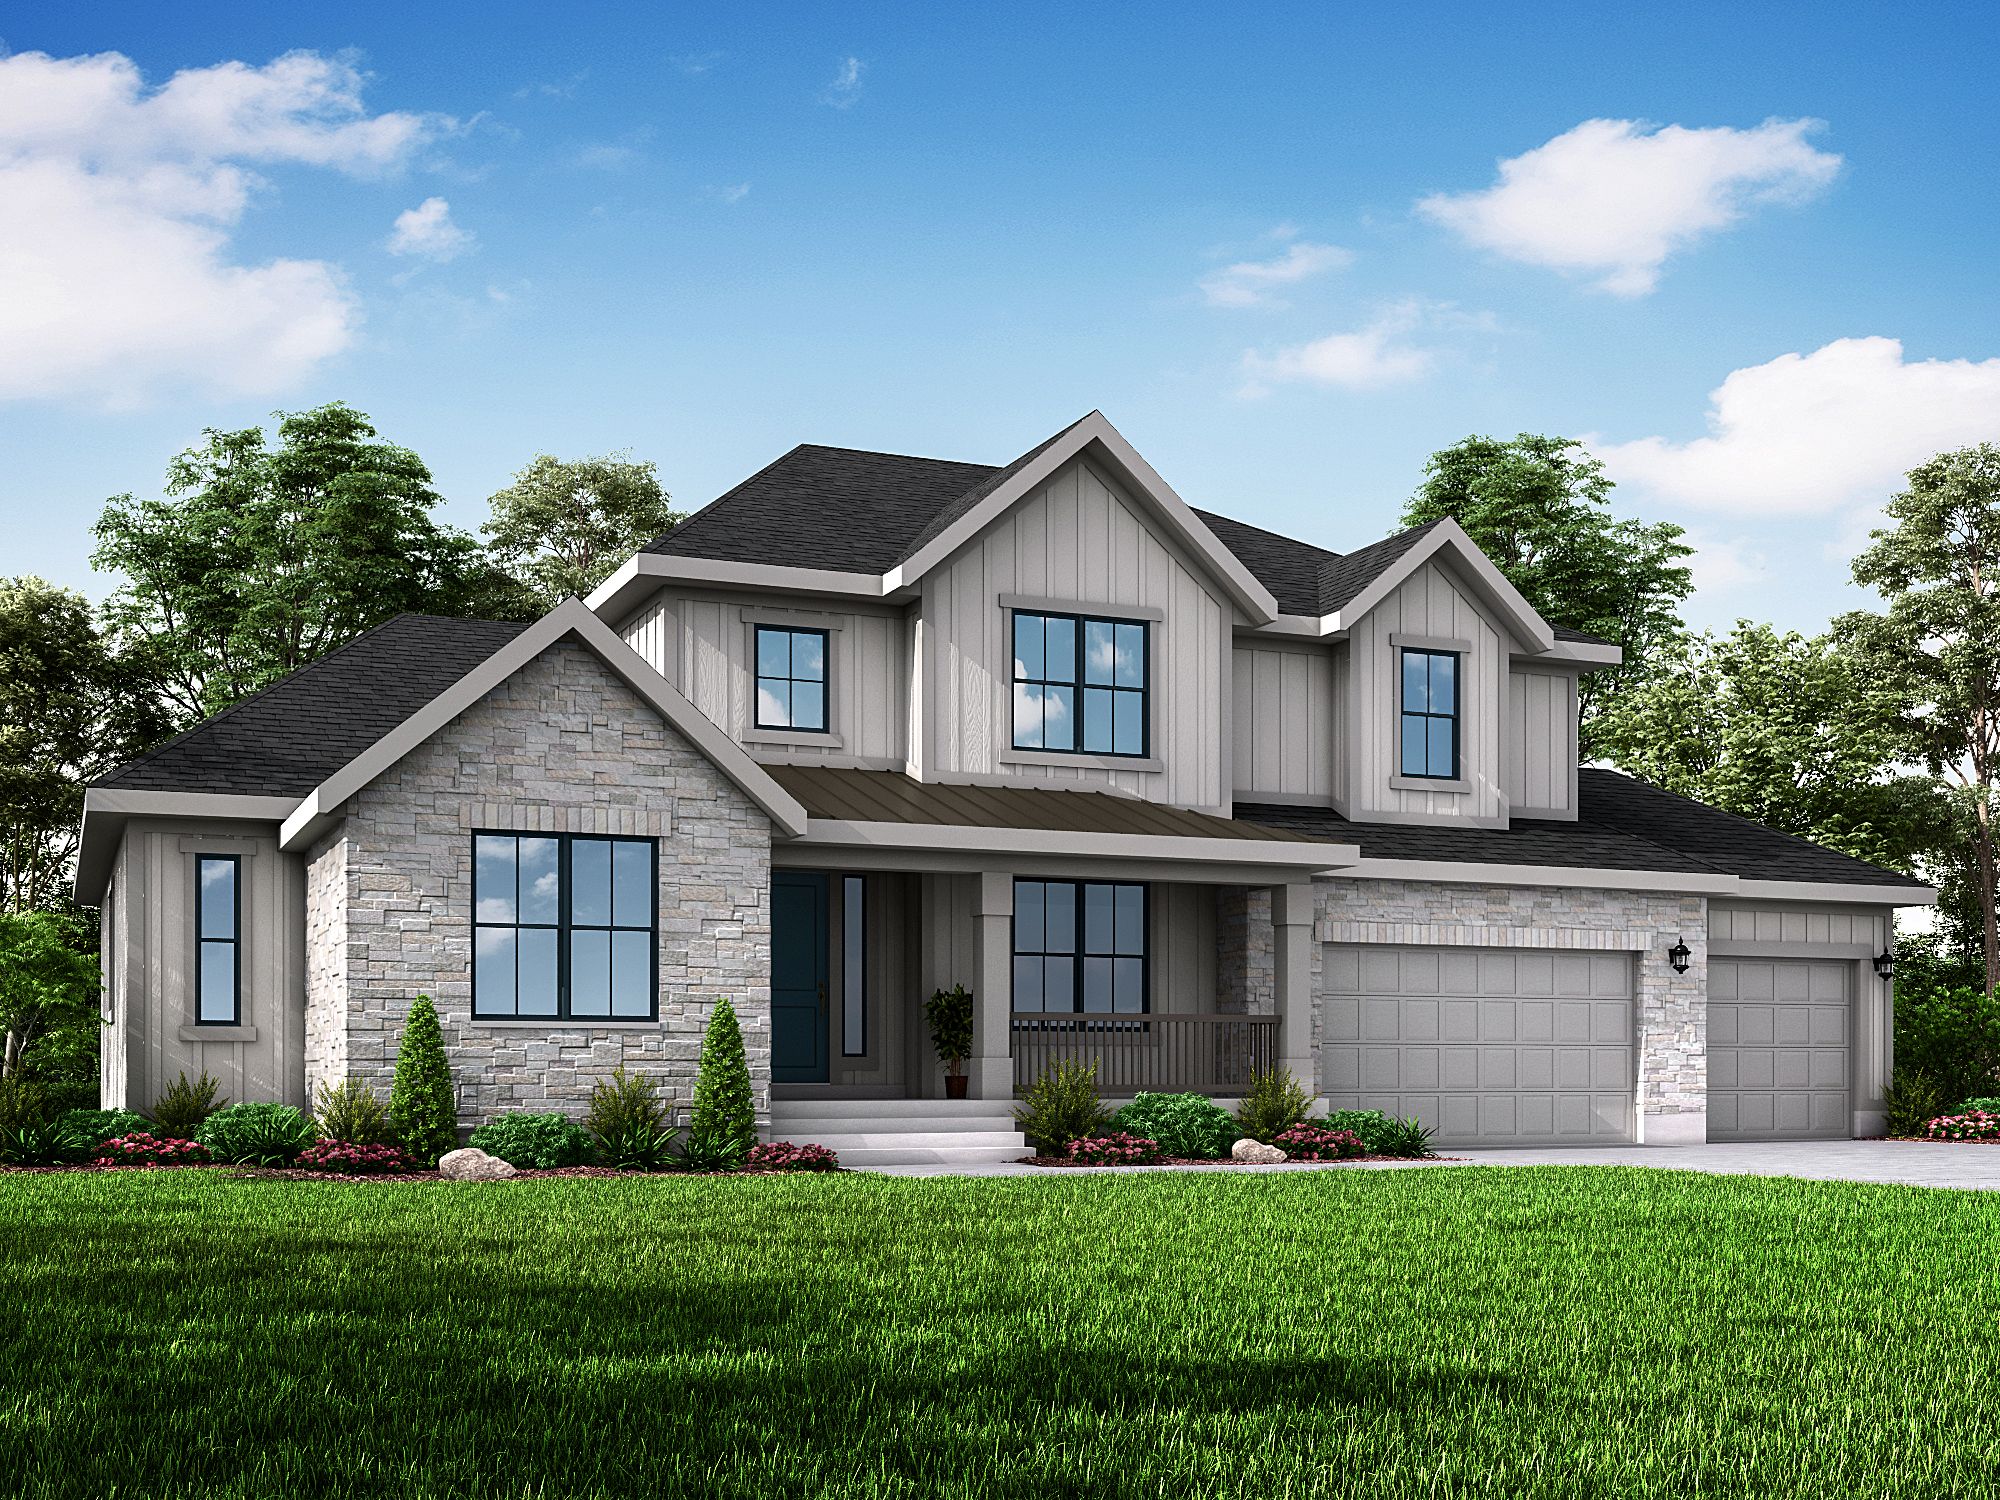 Bella Vista Traditional Two-story A Design luxurious | Home